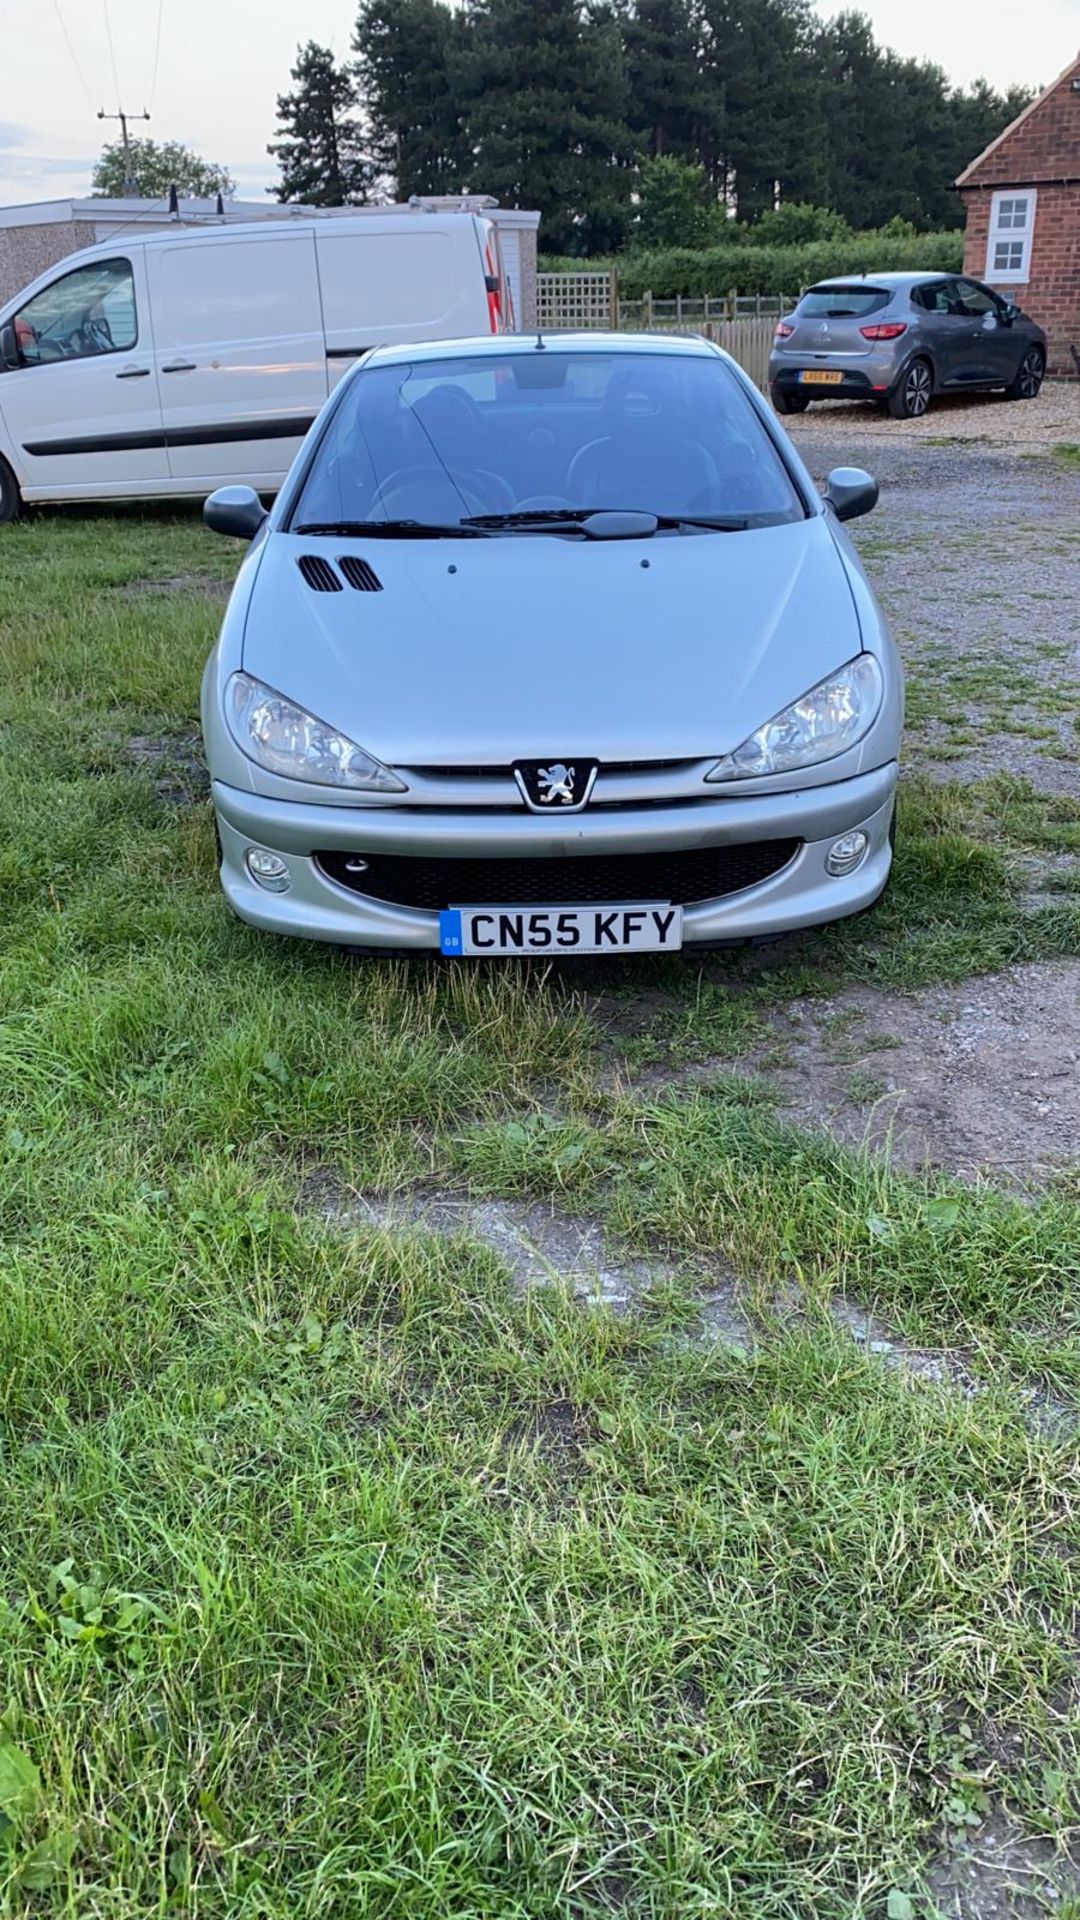 2006/55 REG PEUGEOT 206 2.0 PETROL SILVER CONVERTIBLE. SHOWING 2 FORMER KEEPERS *NO VAT* - Image 4 of 13